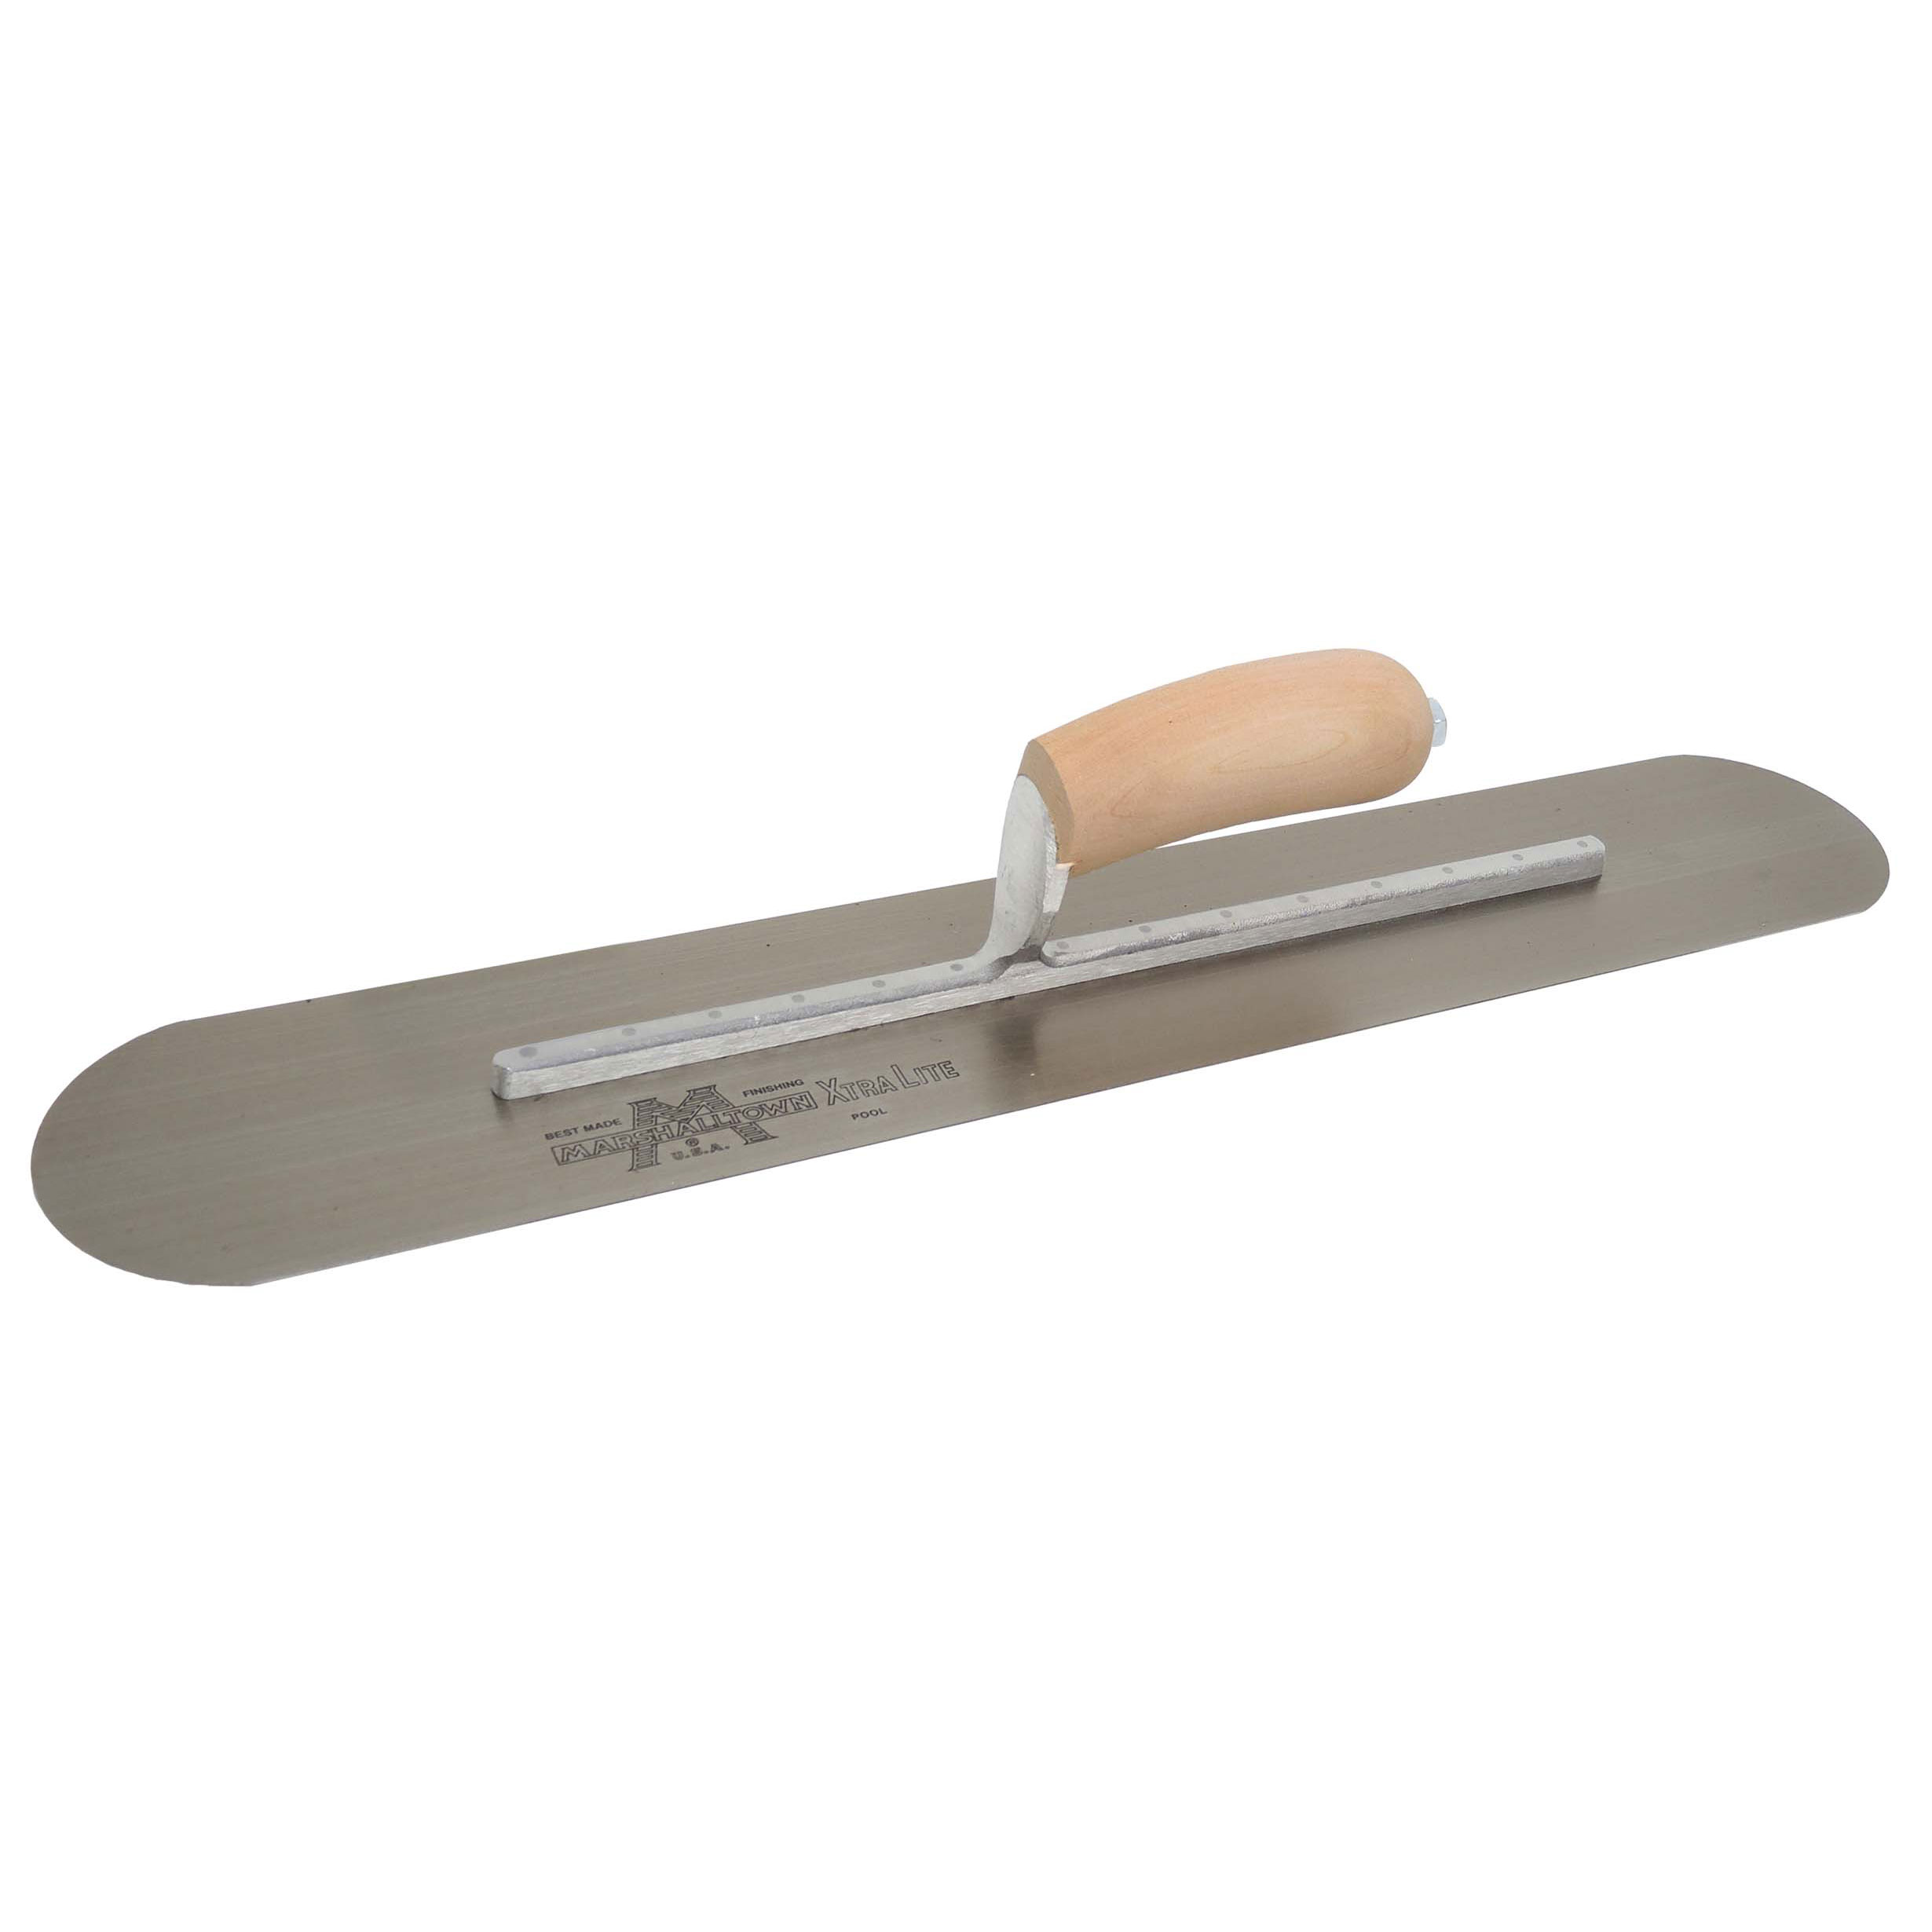 Marshalltown SP22 22in x 4in Pool Trowel with Curved Wood Handle SP22